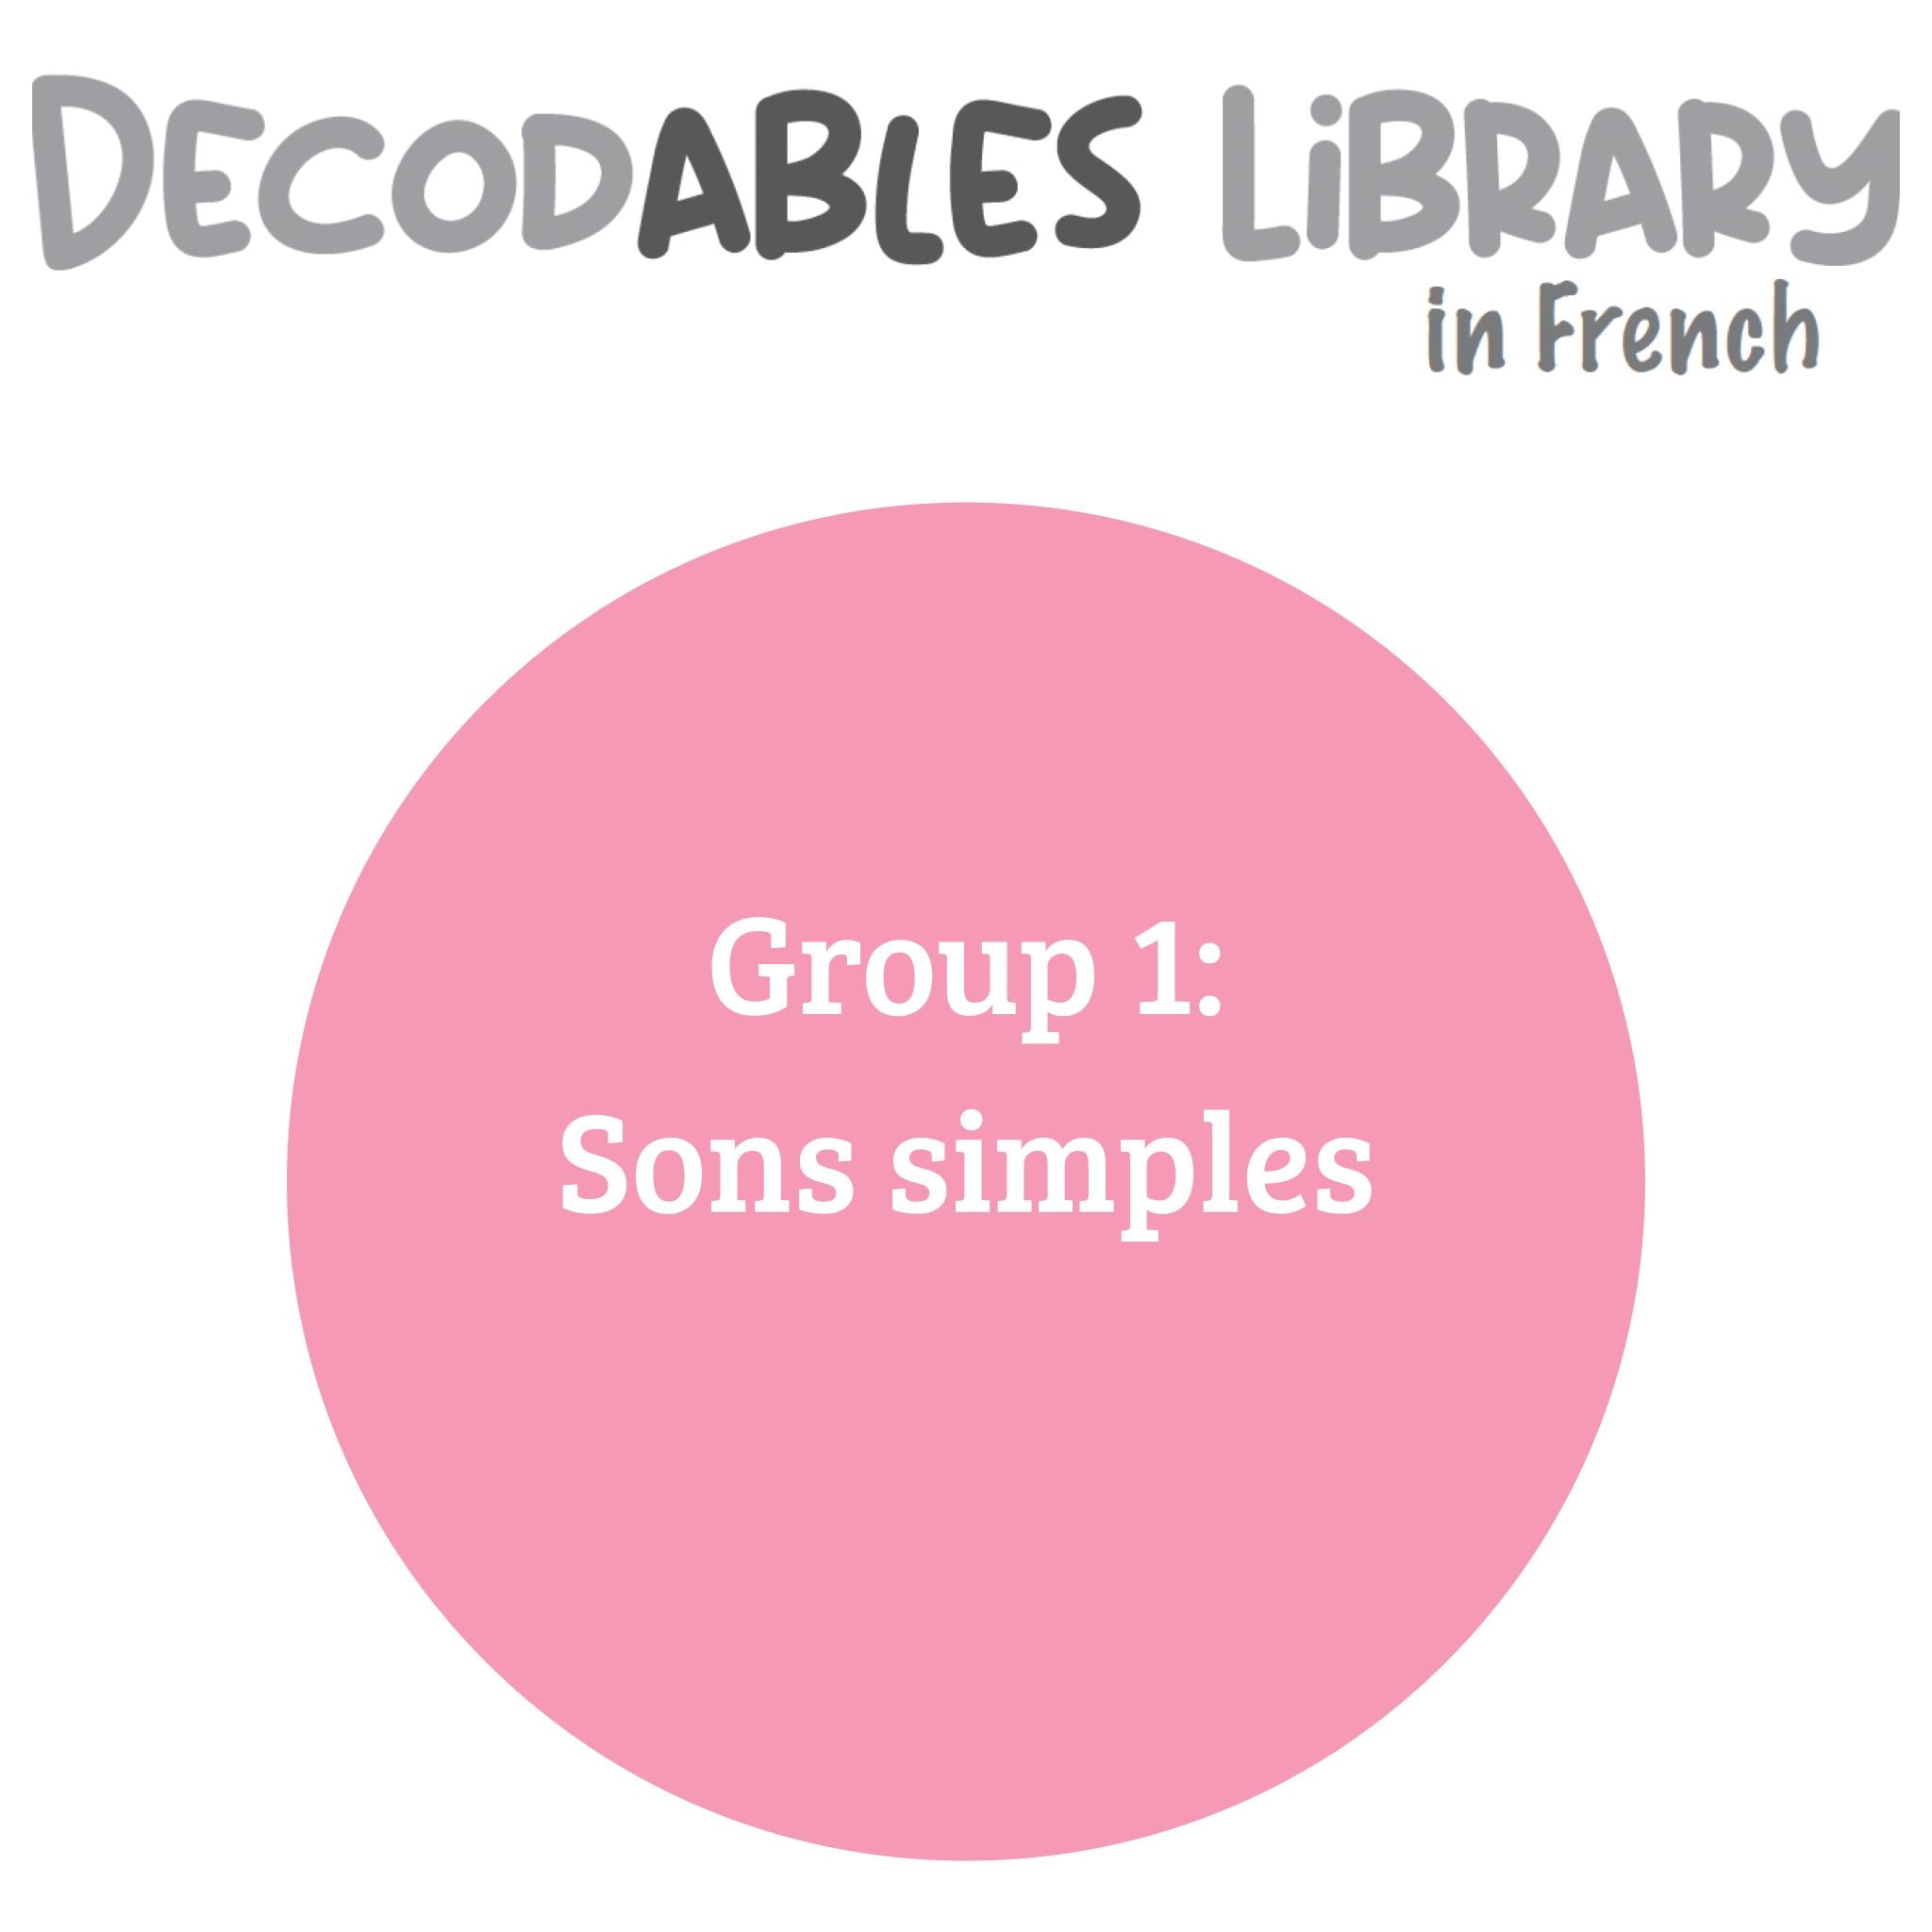 French Decodables Library - Group 1 - Sons simples (set of 40 titles)